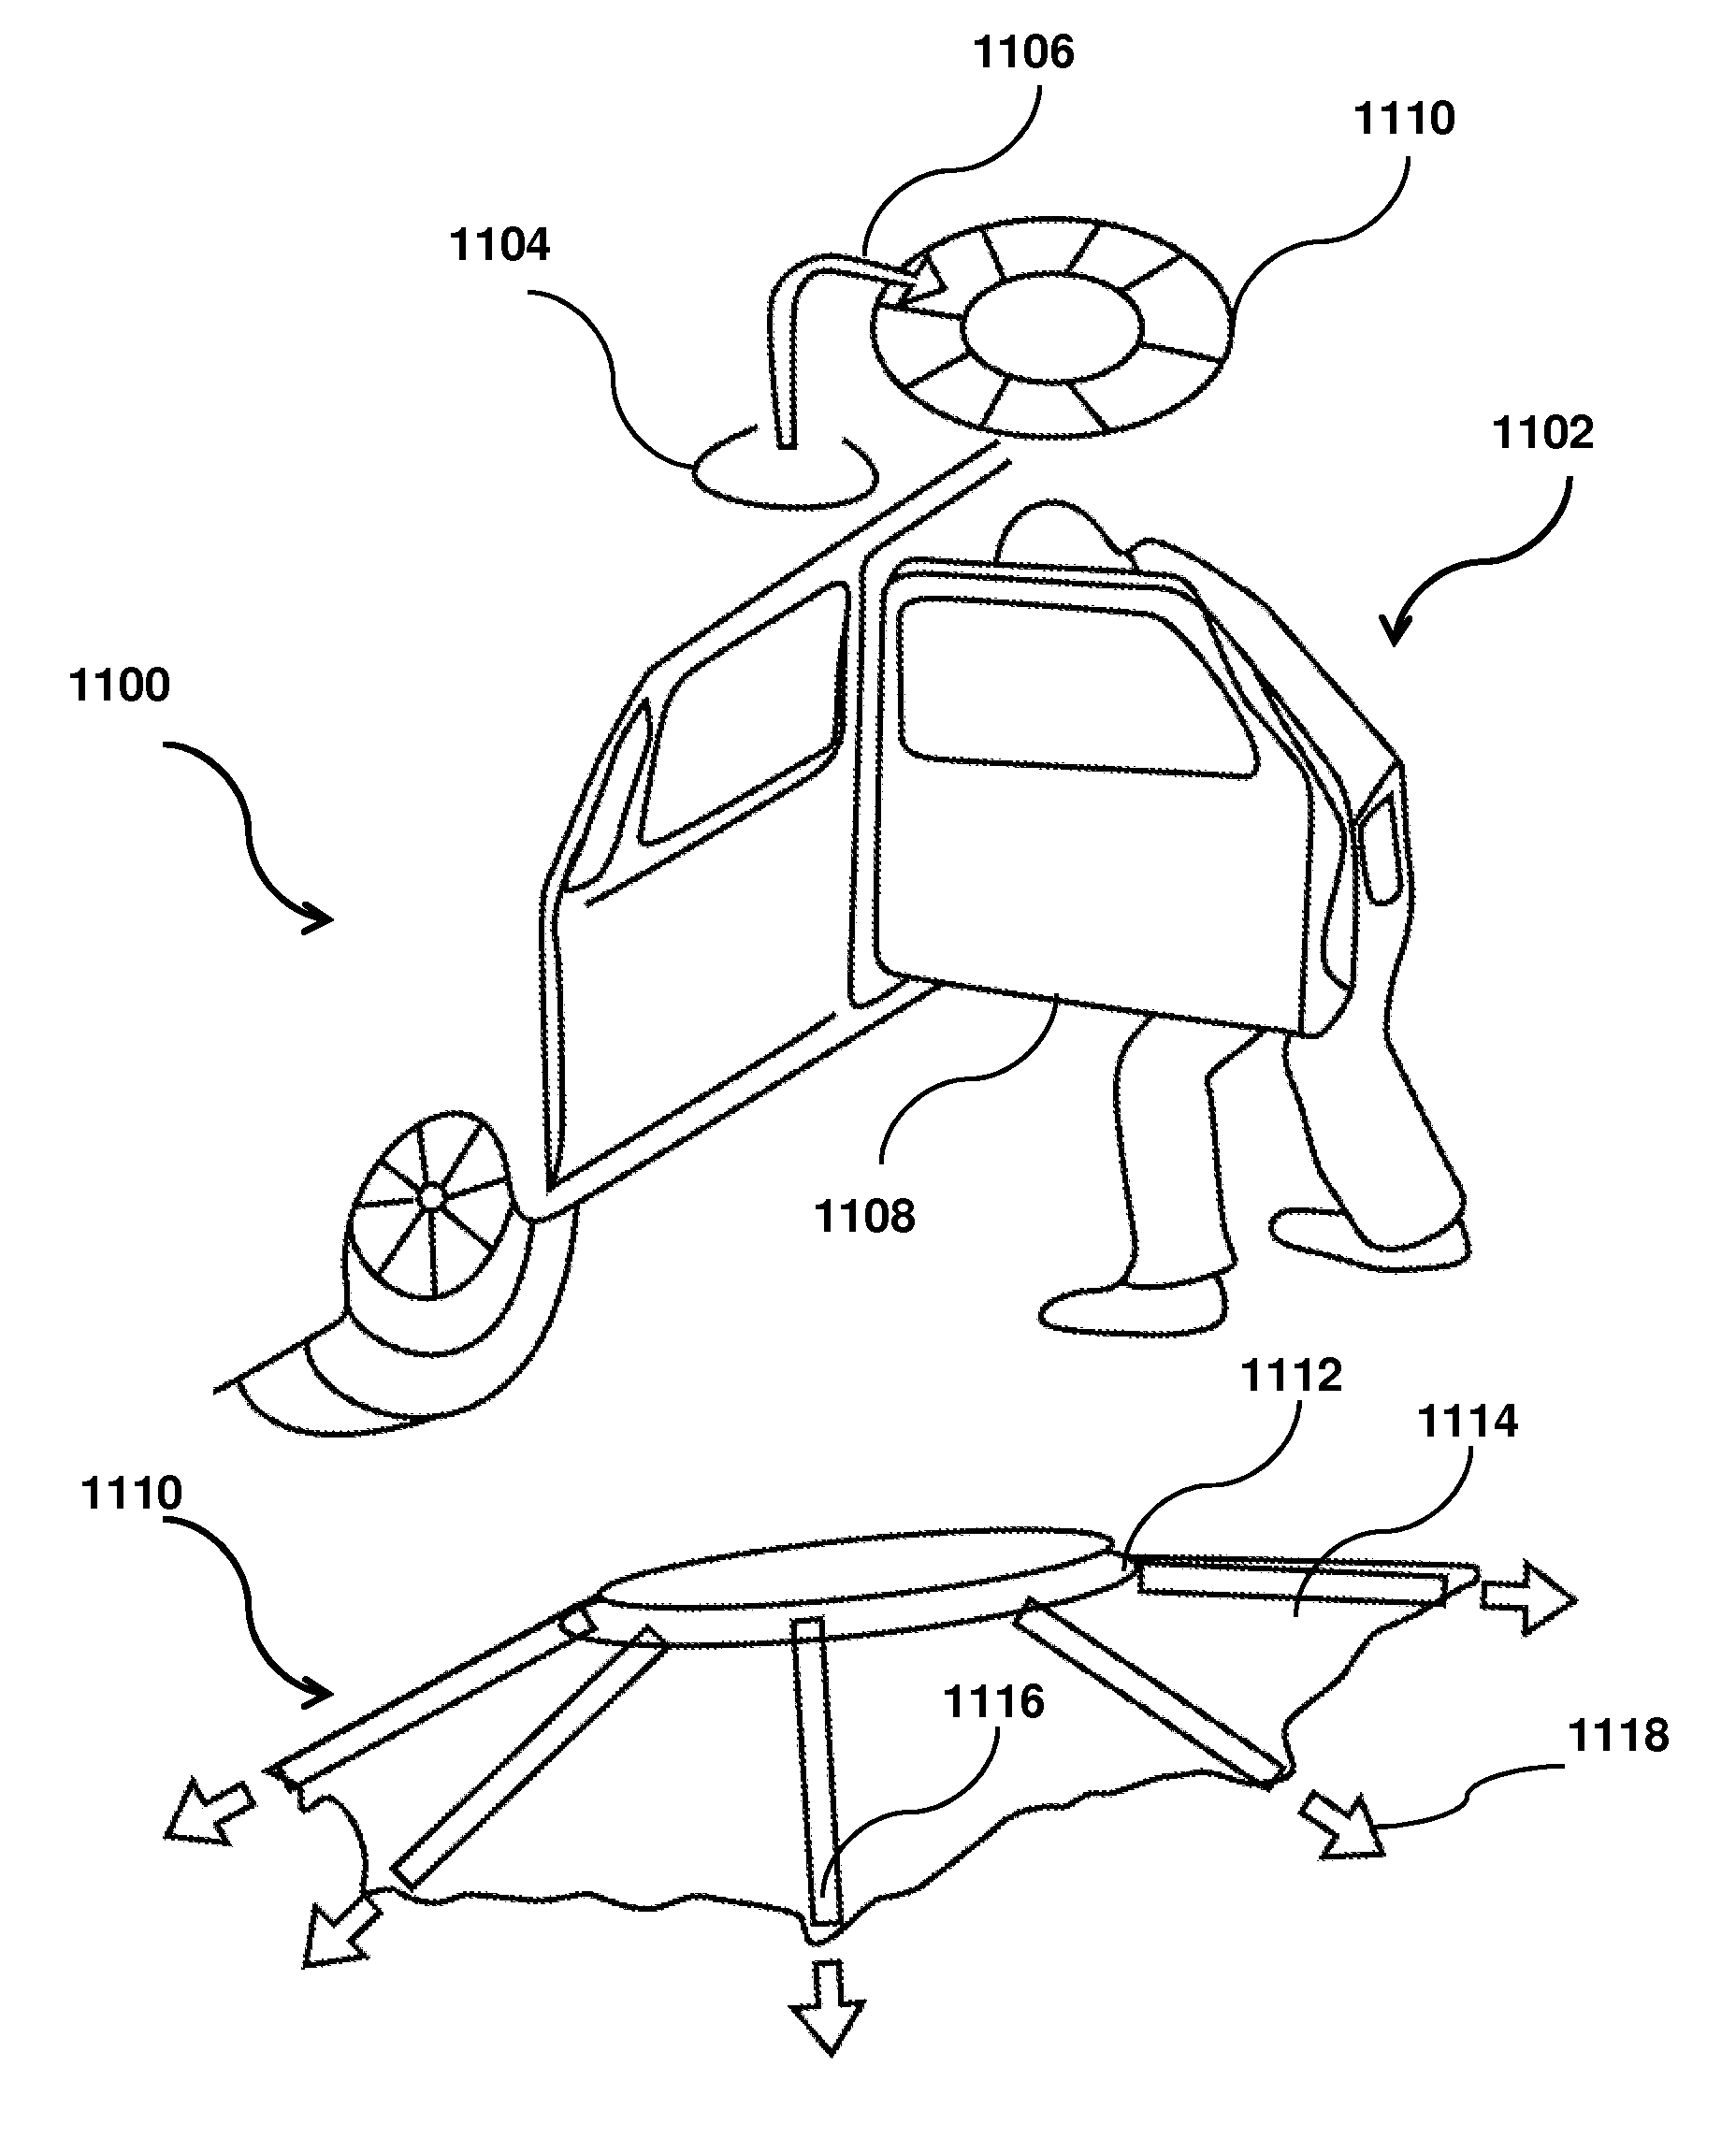 Apparatus and methods for tracking using aerial video